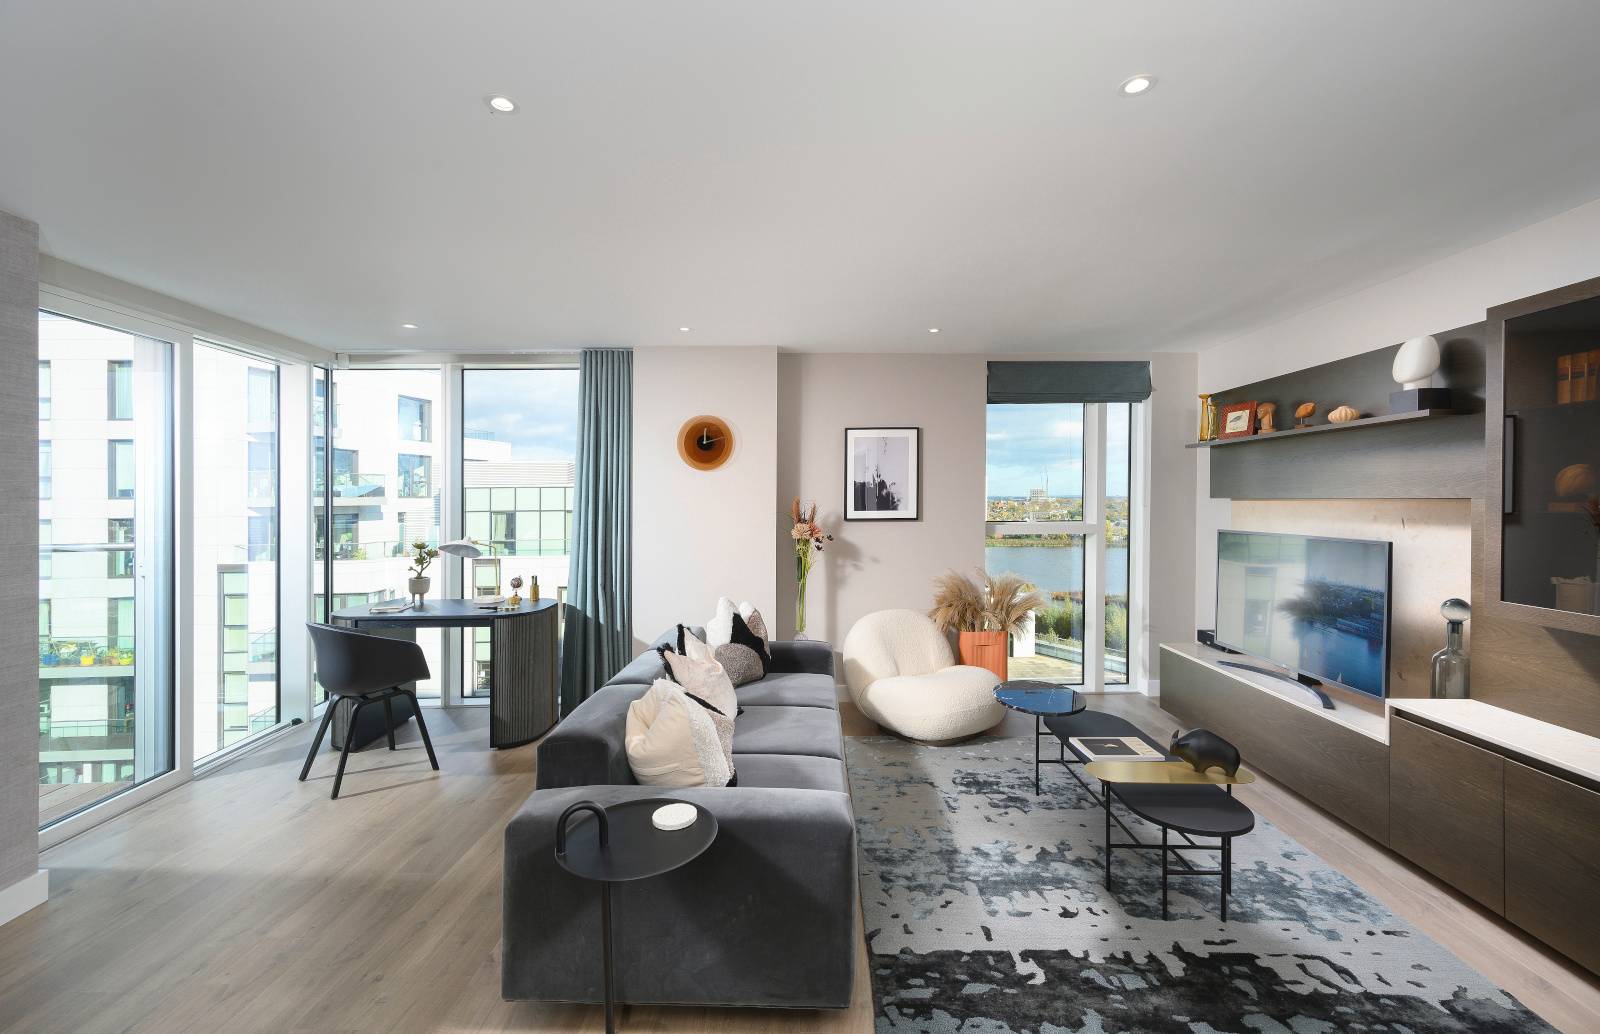 Hidden Oasis, 10 minutes from Central London -  Luxury 3-Bedroom Penthouse in a Stunning New Development Surrounded by Nature - Seventeenth Floor - Reservoirs and Park Views